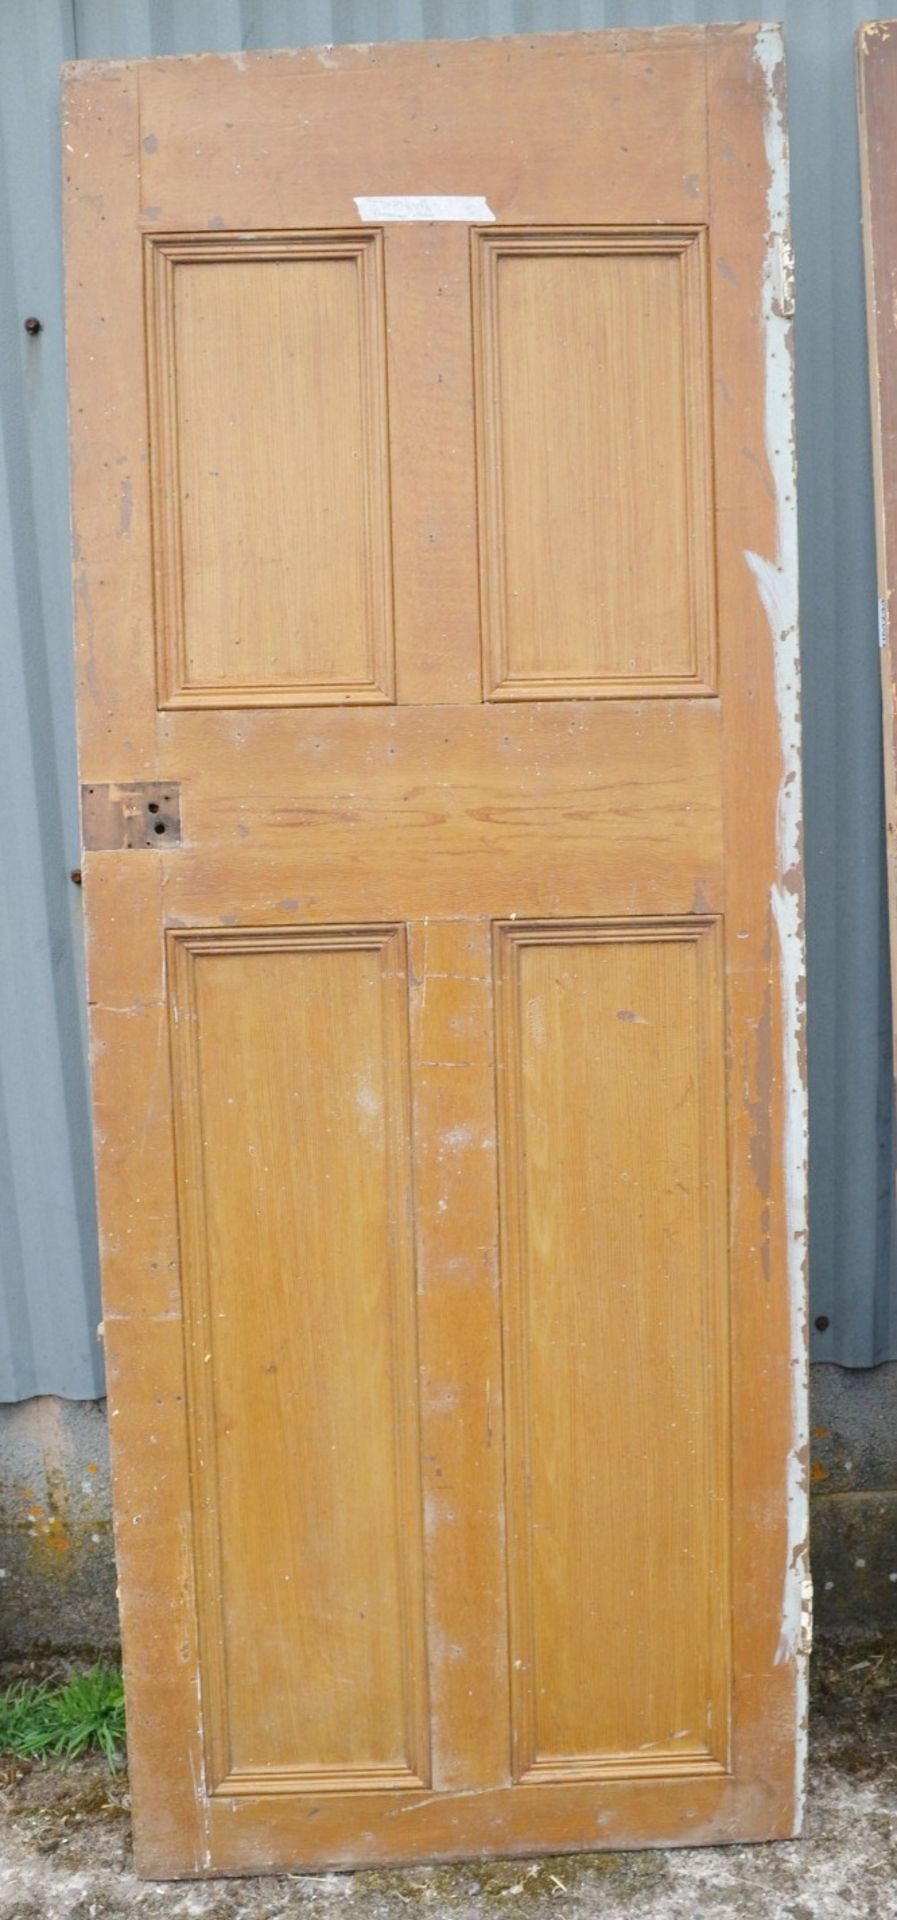 Set Of 4 x Reclaimed 4-Panel Wooden Doors - Taken From A Grade II Listed Property - Image 6 of 9